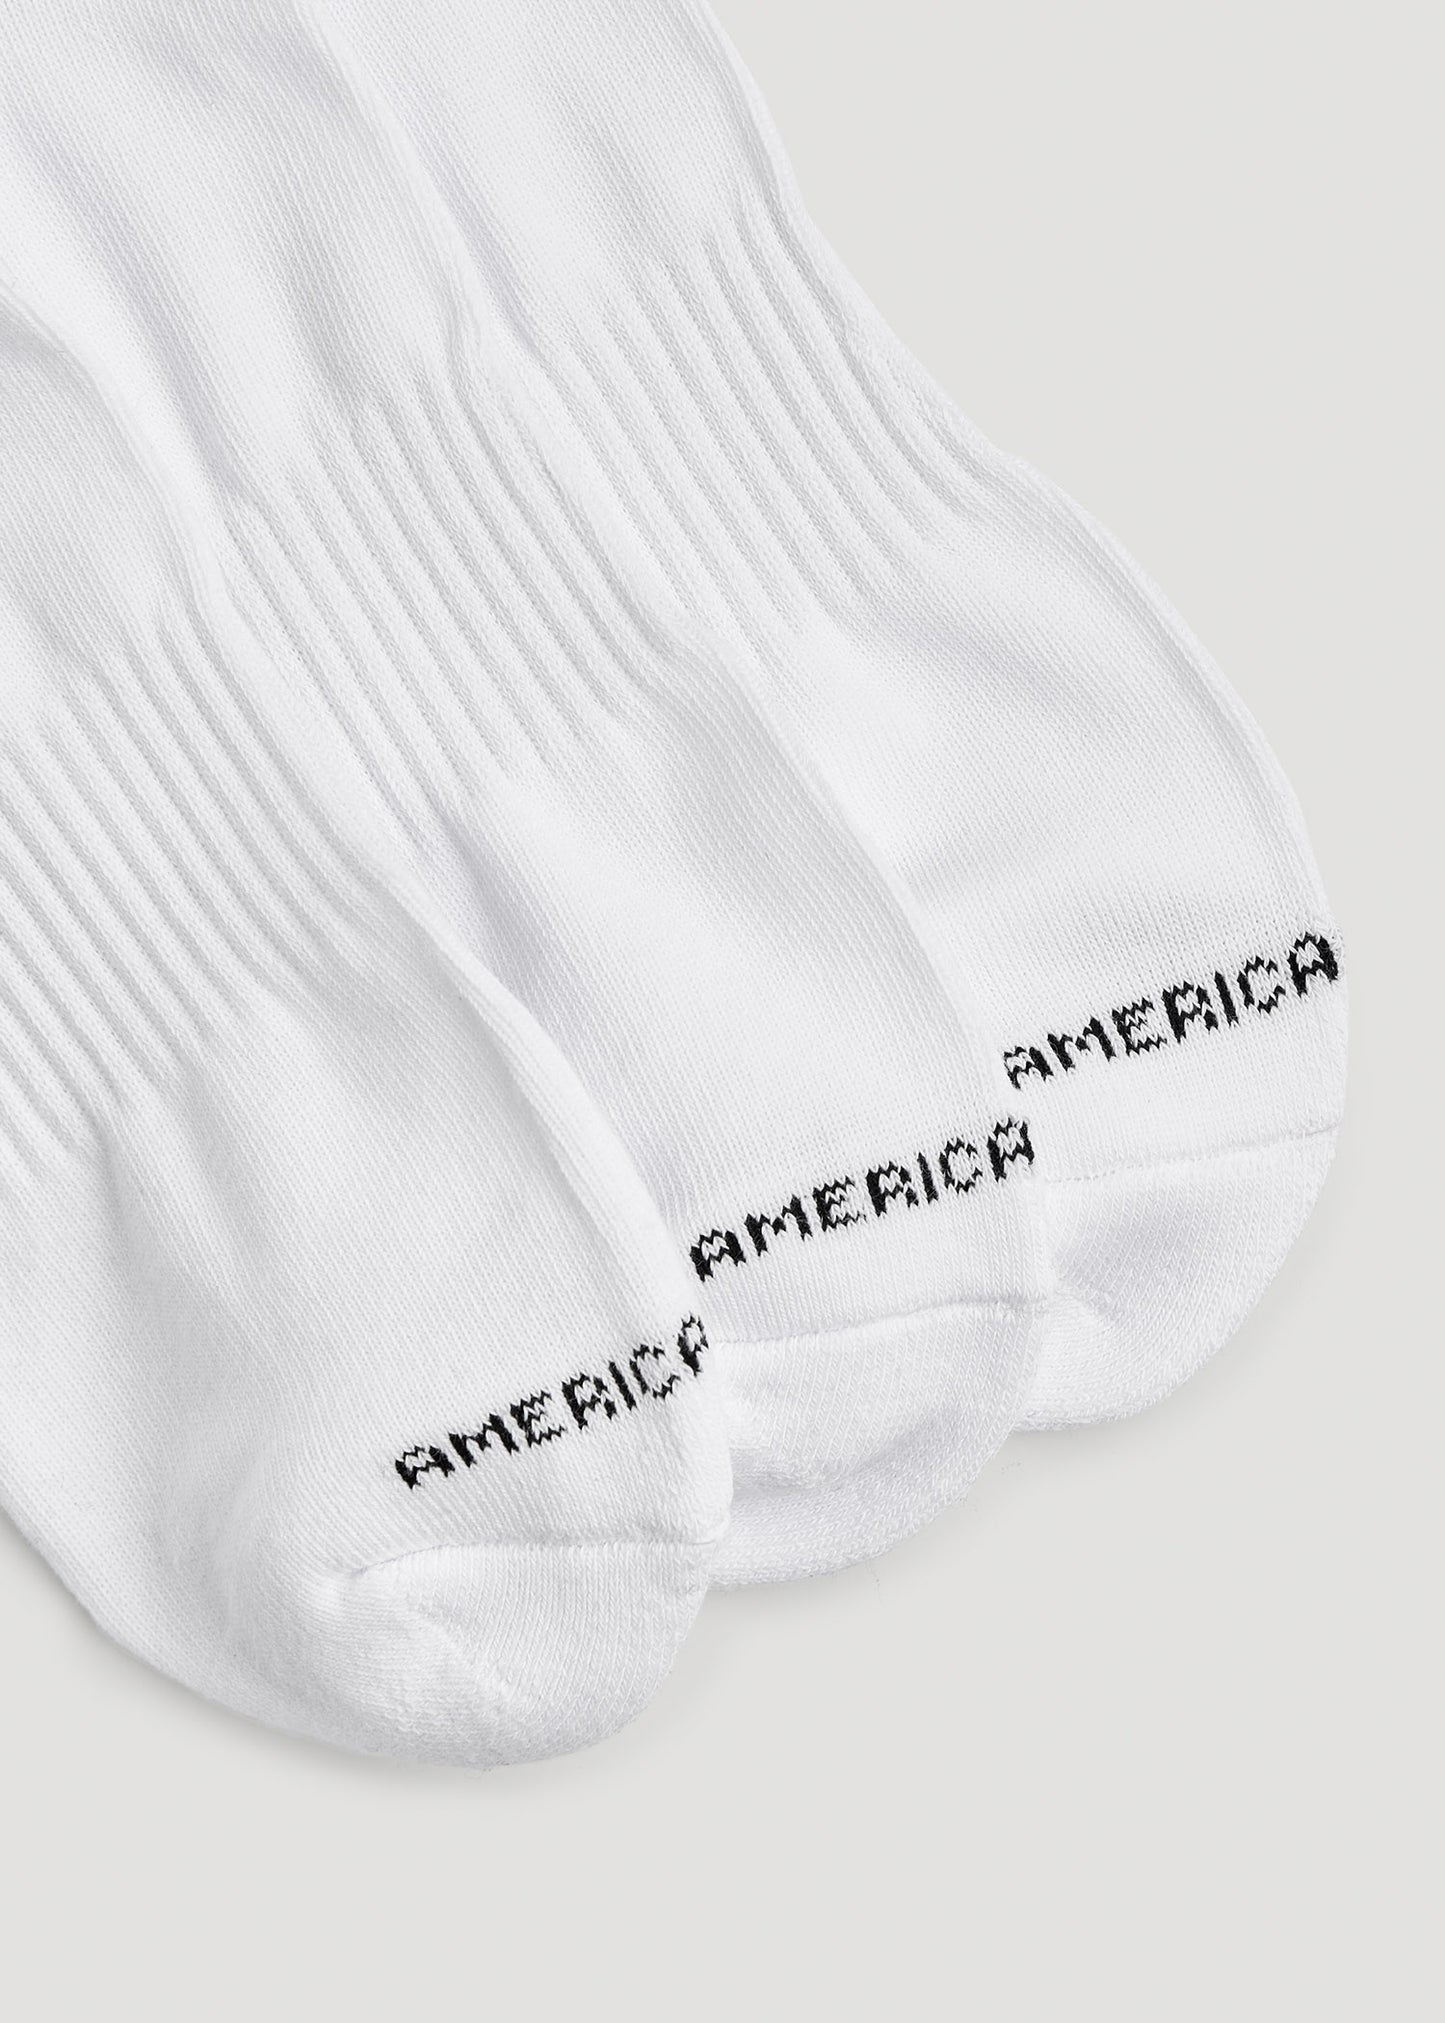    American-Tall-Mens-Athletic-Low-Ankle-Socks-X-Large-Size-14-17-White-3-Pack-Detail